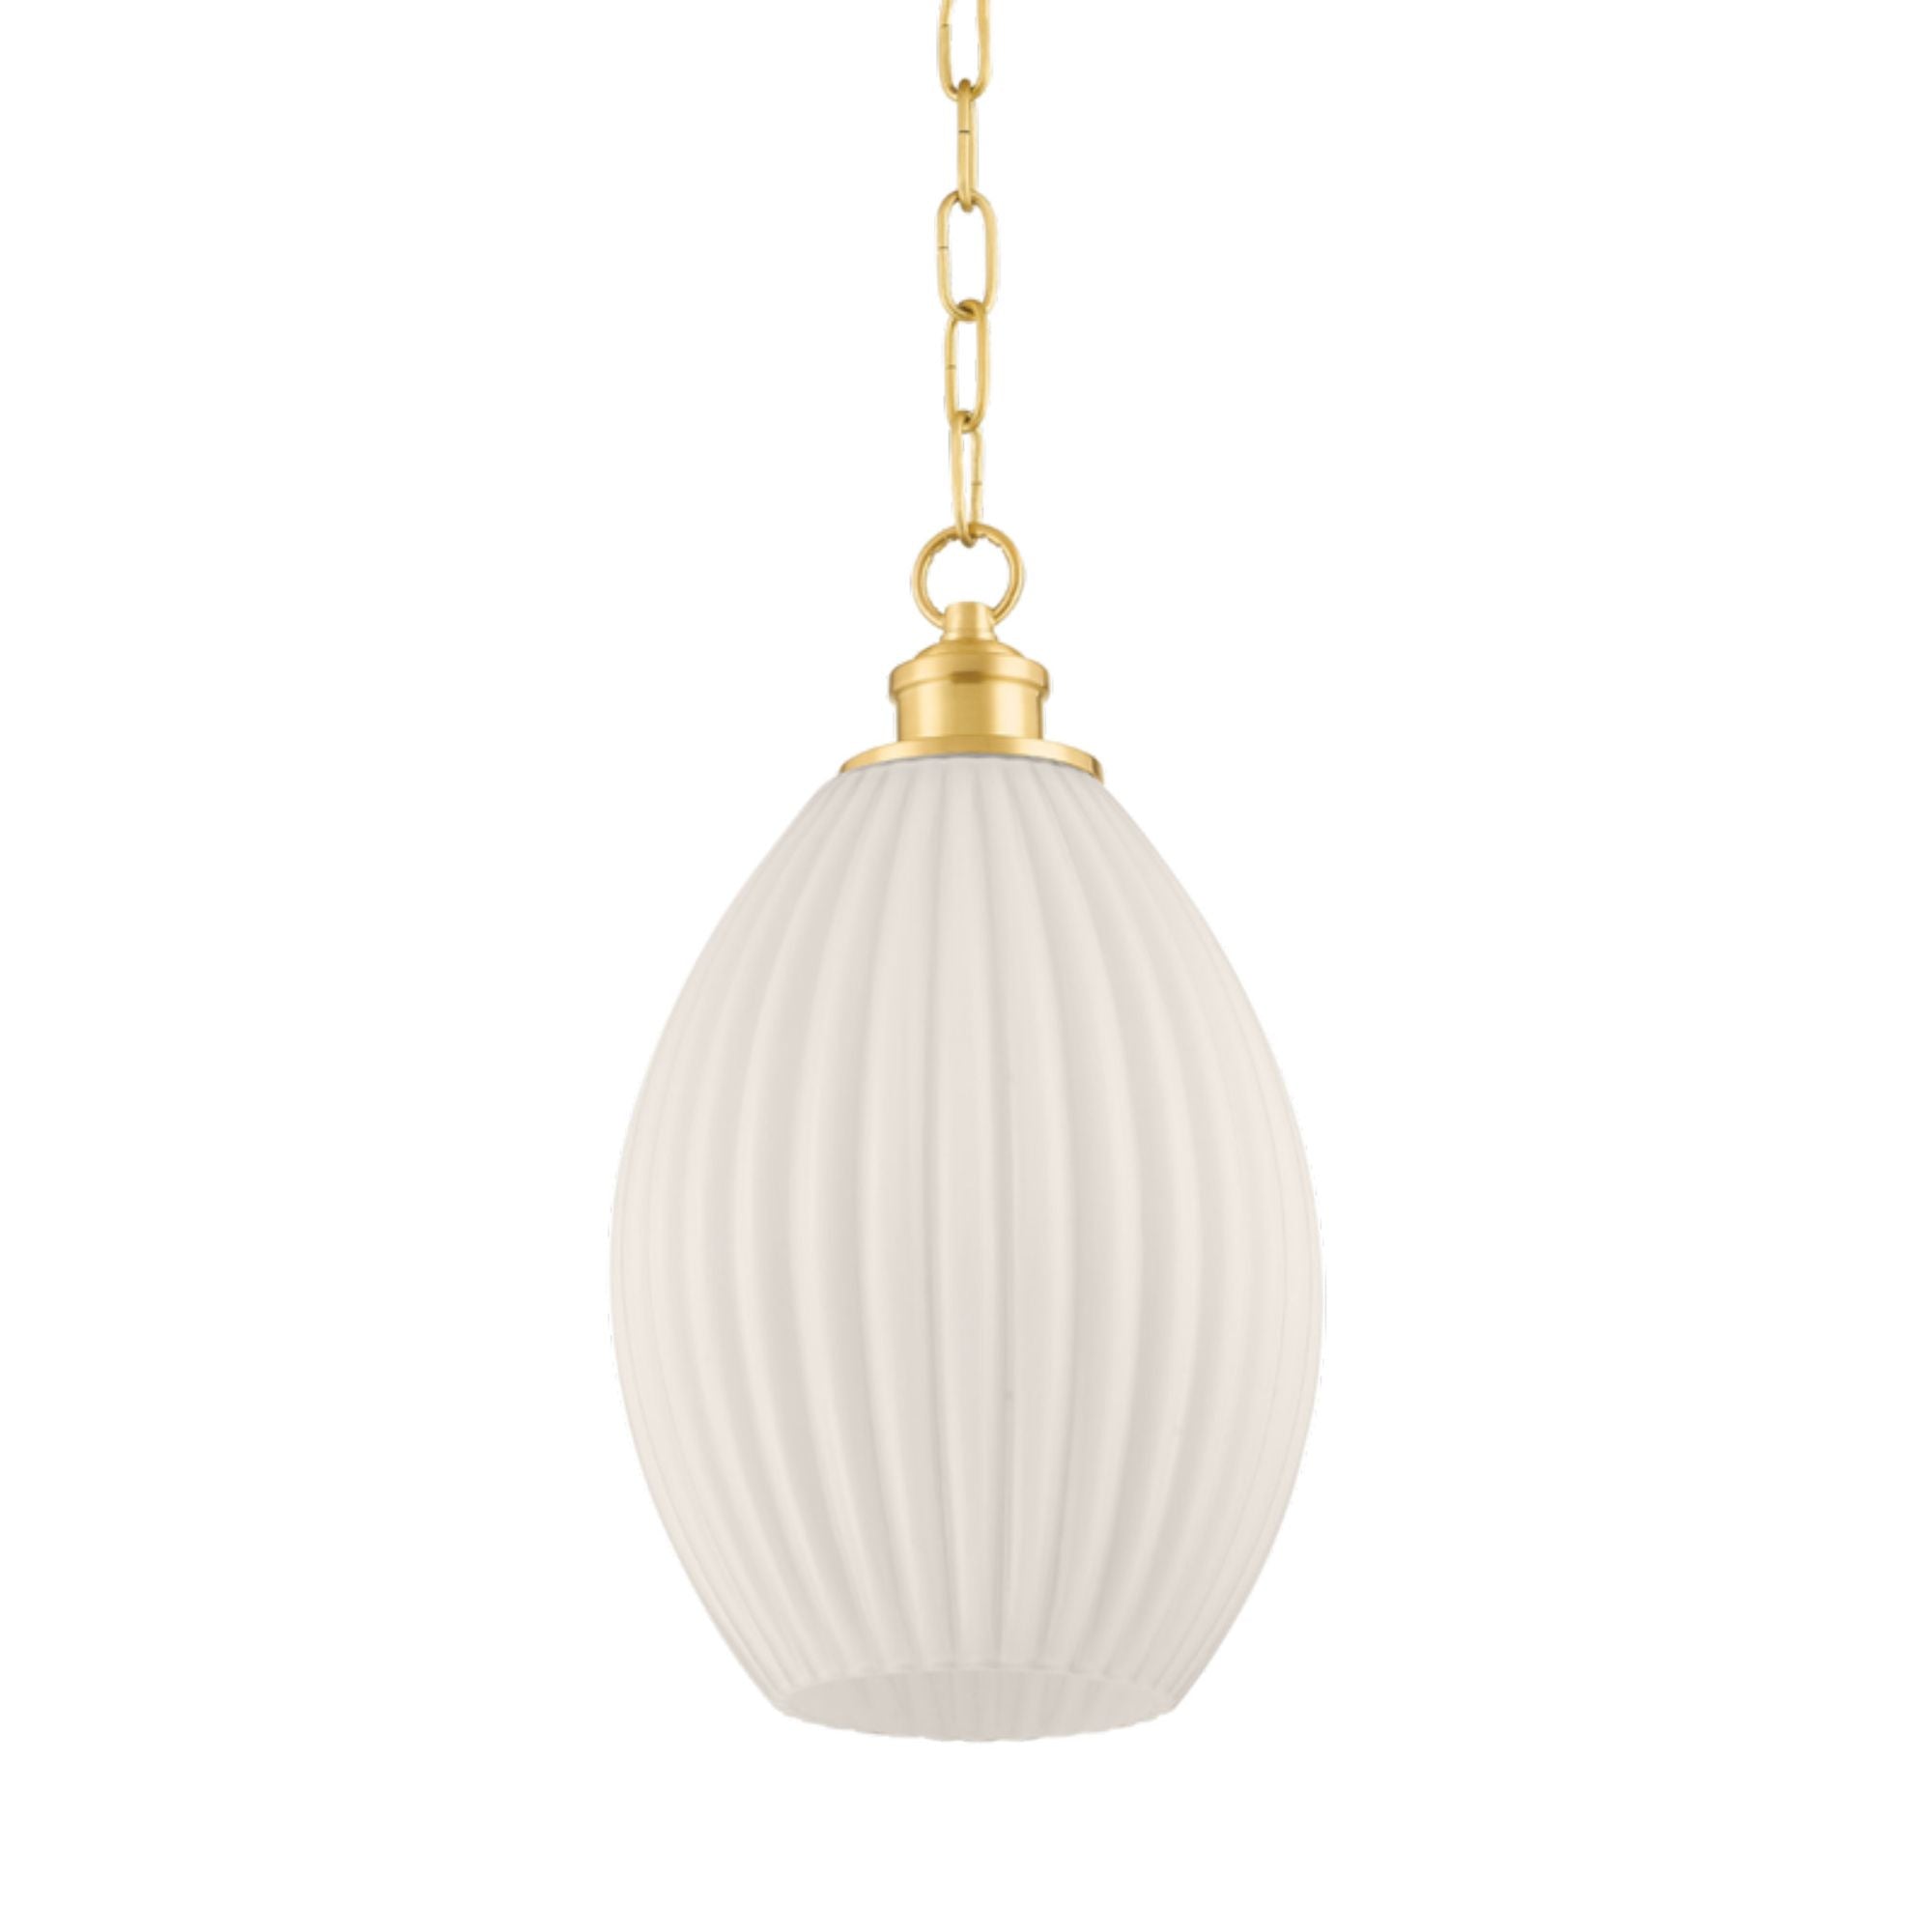 Hillary 1-Light Pendant in Aged Brass by Zio & Sons